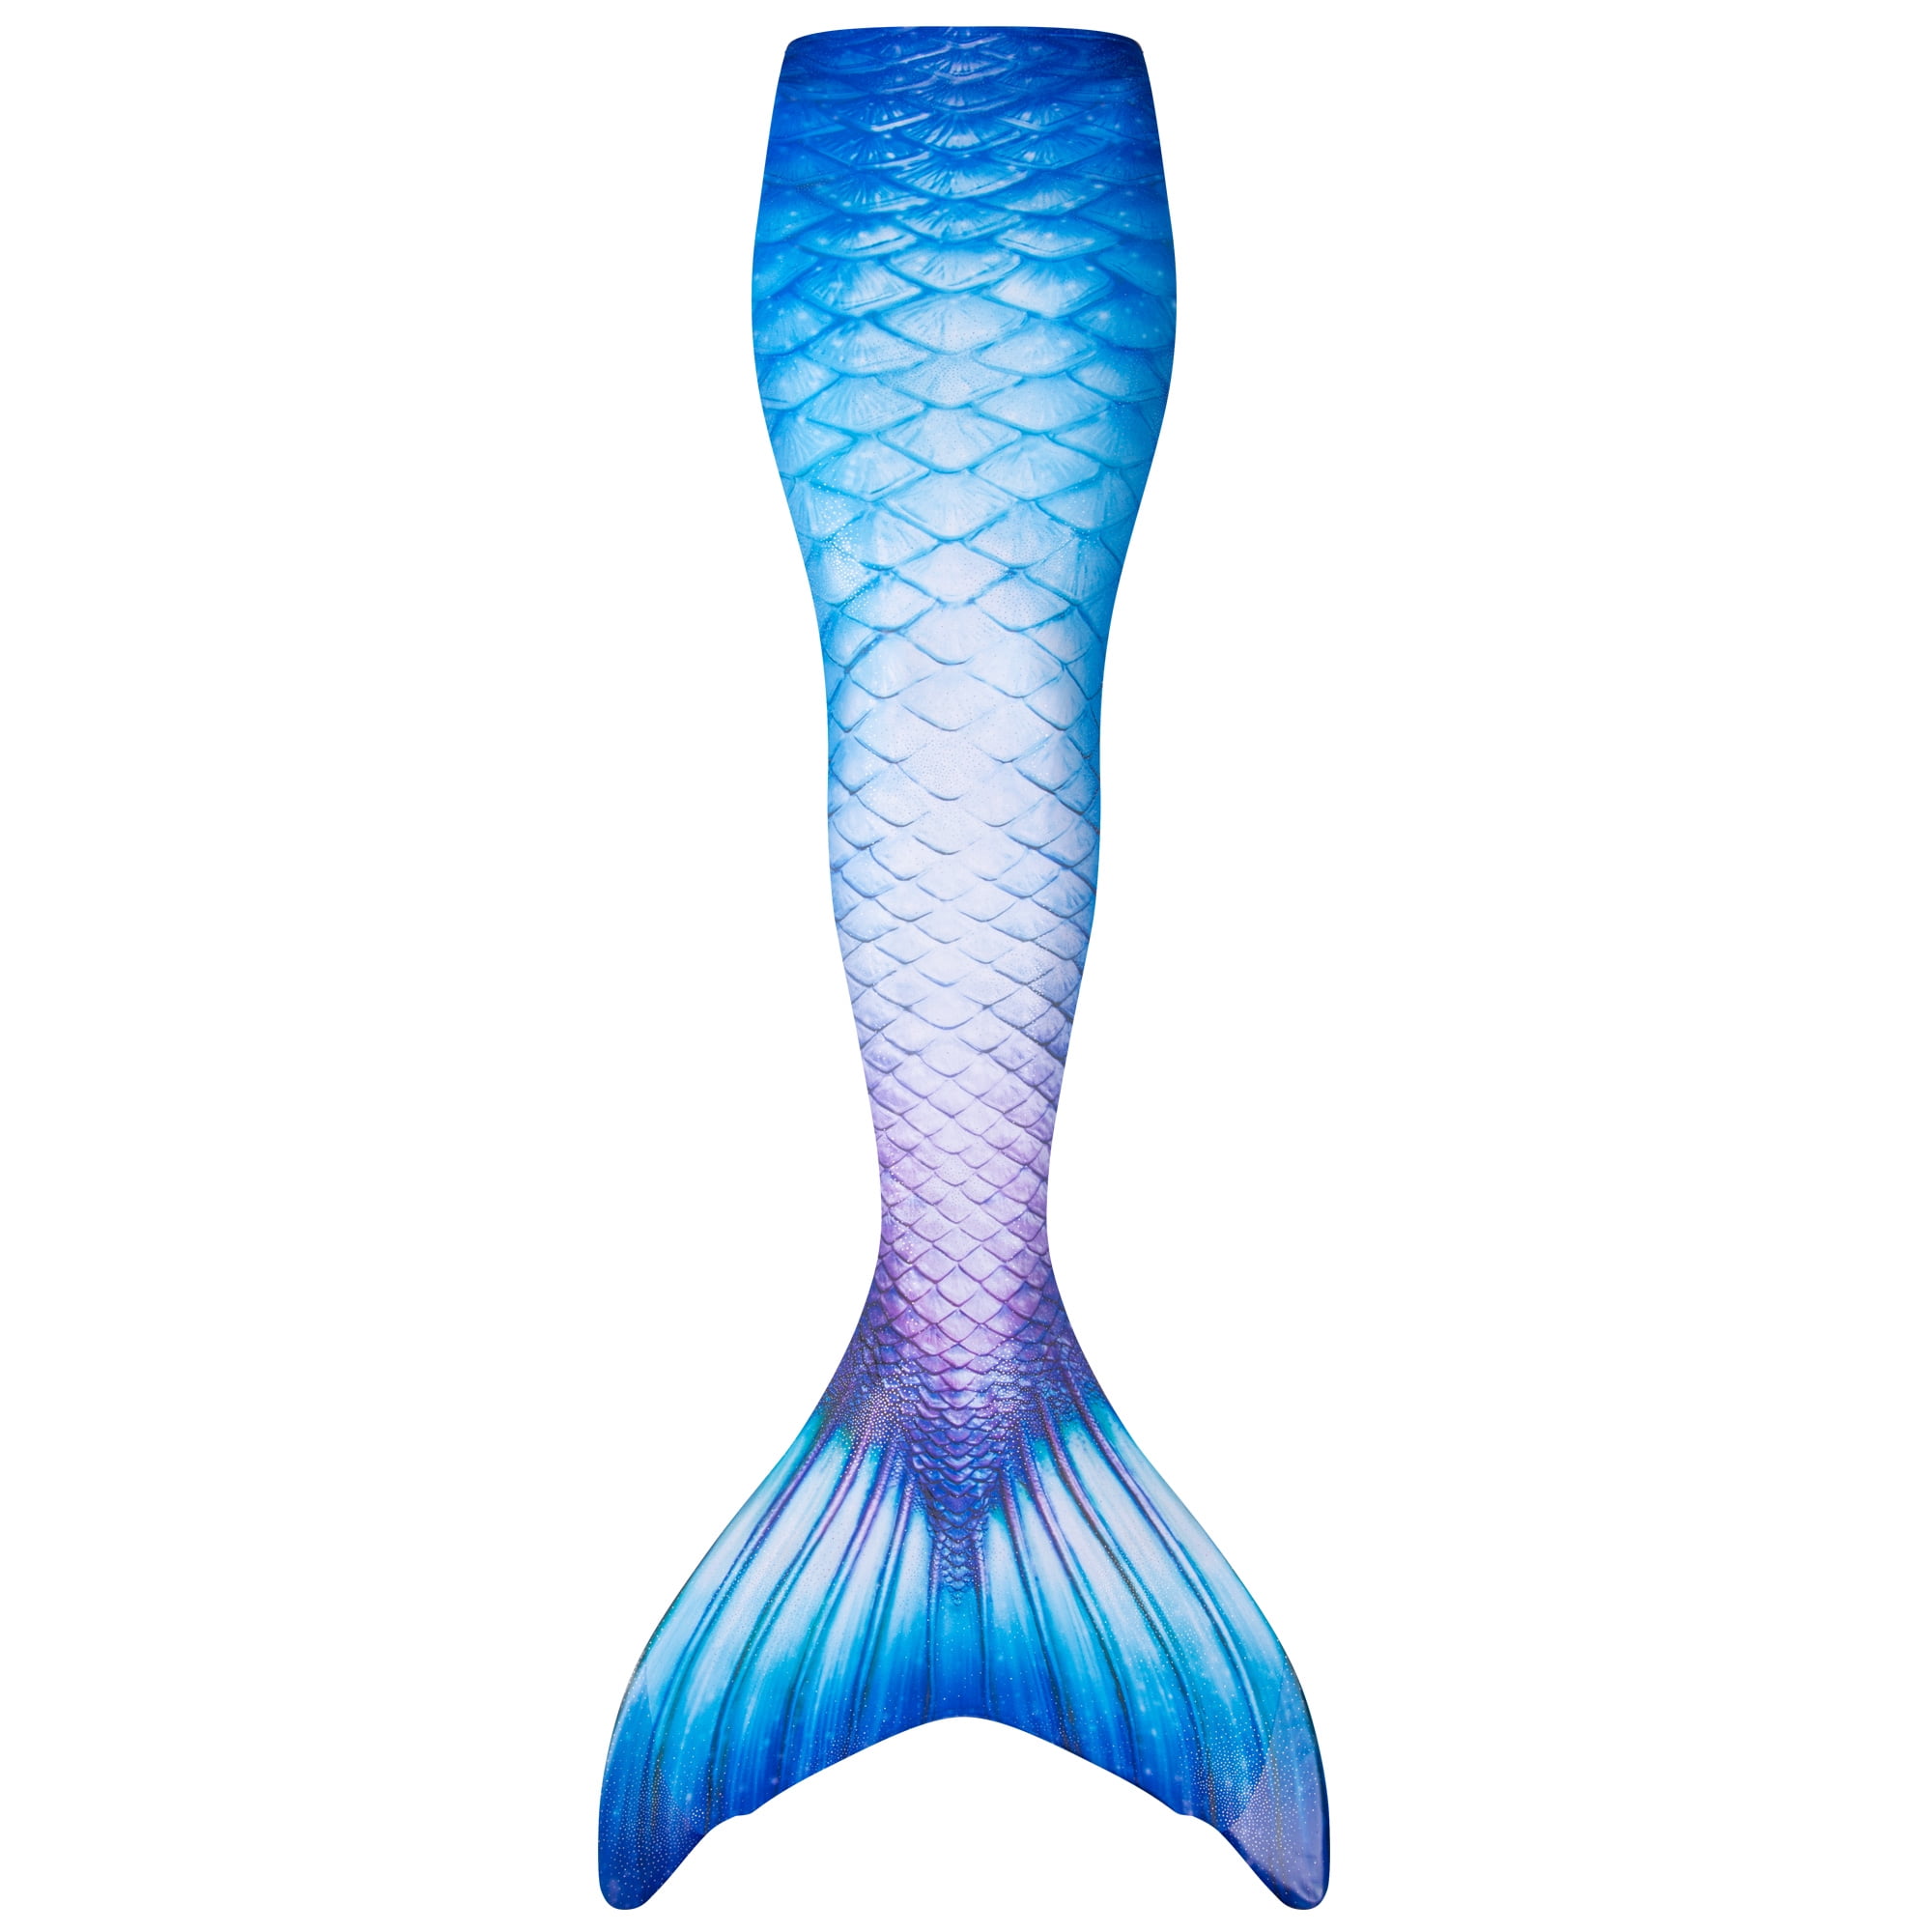 Mermaid Monofin Swim Fin For Kids And Adults Diving Mermaid Fins Foot Flipper Training Monofin Tail For Swimming One-Piece Flipper Swim Fins Swimming Training Fins Swim Fin Mermaid Monofin Tails